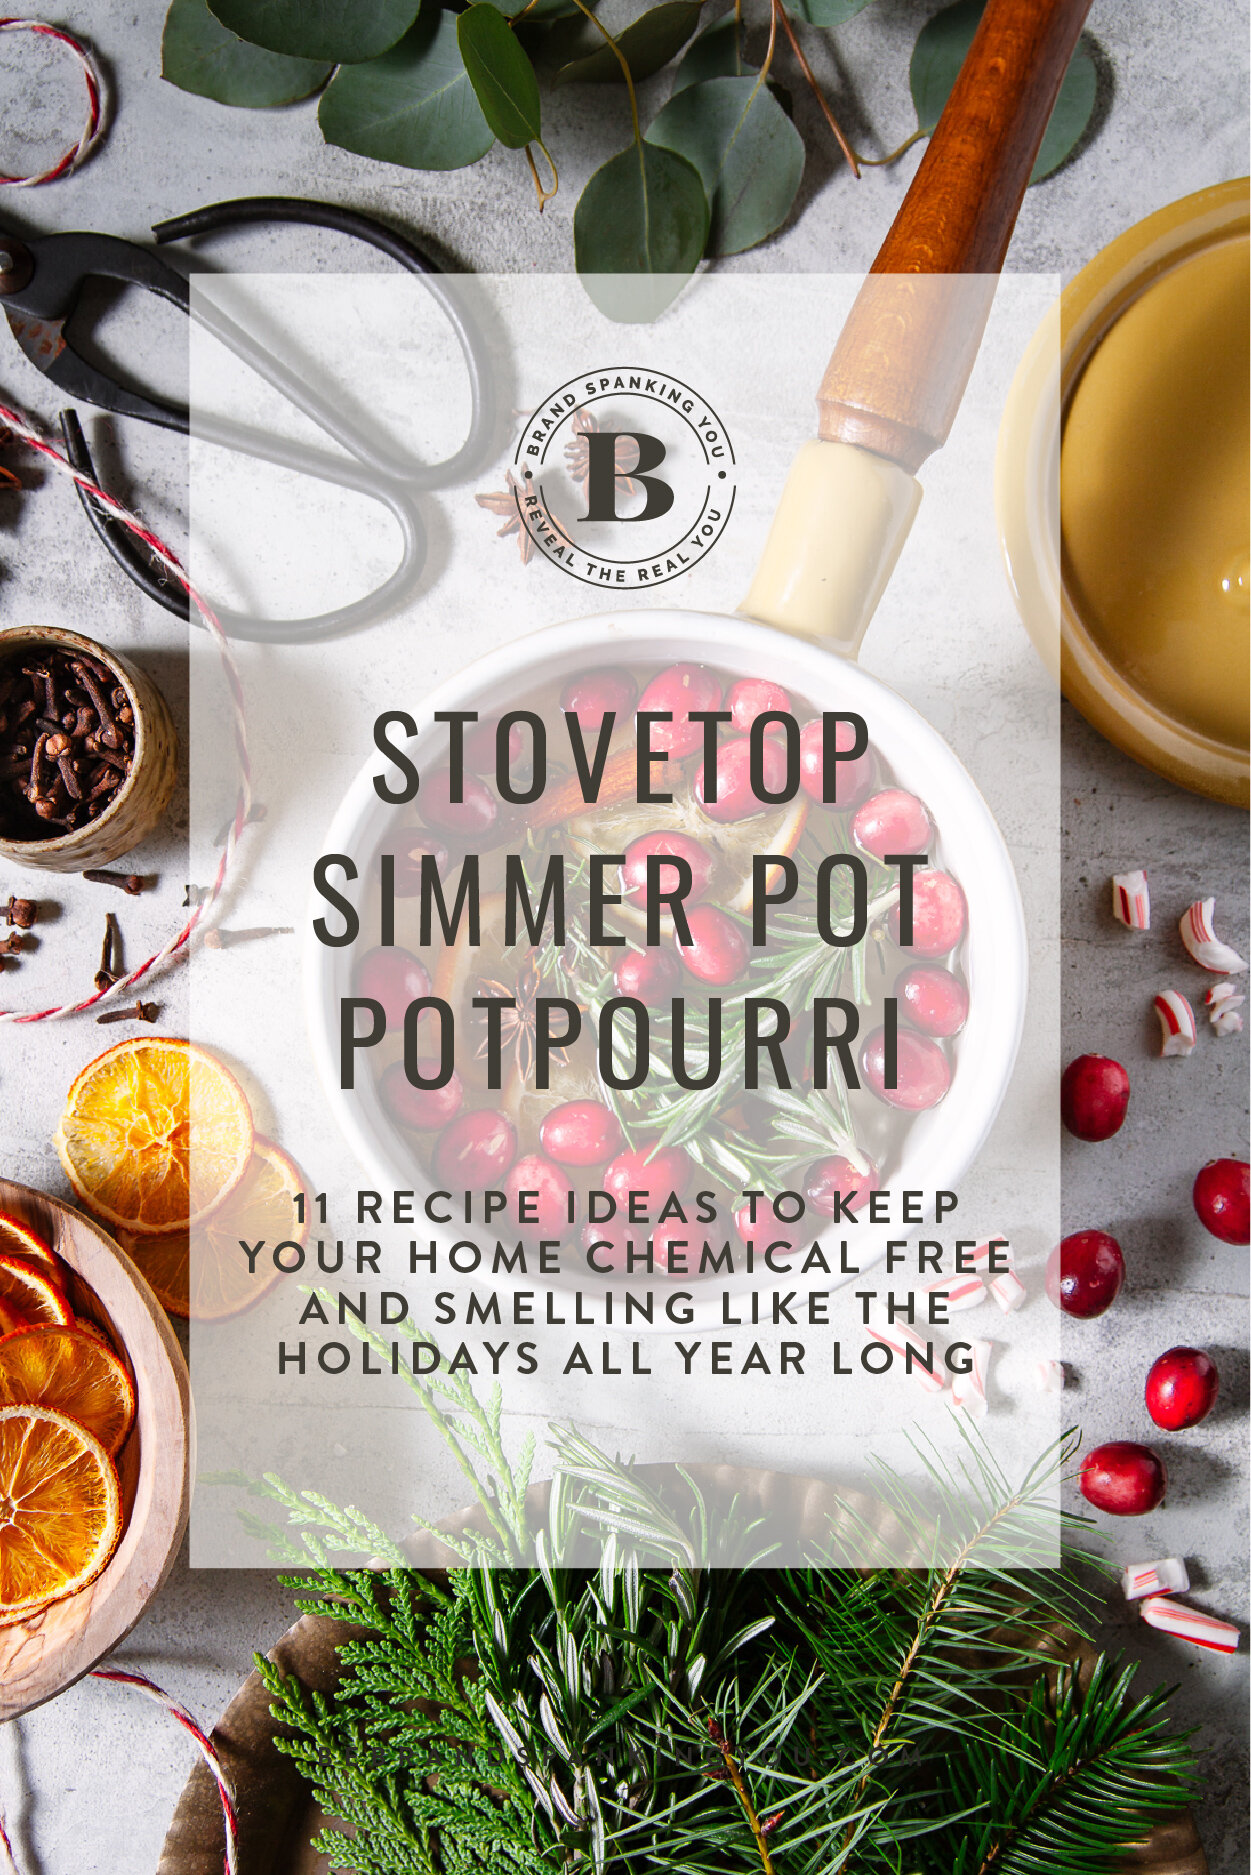 Easy Simmer Pot Recipes for a Delicious Smelling Home - Eleanor Rose Home